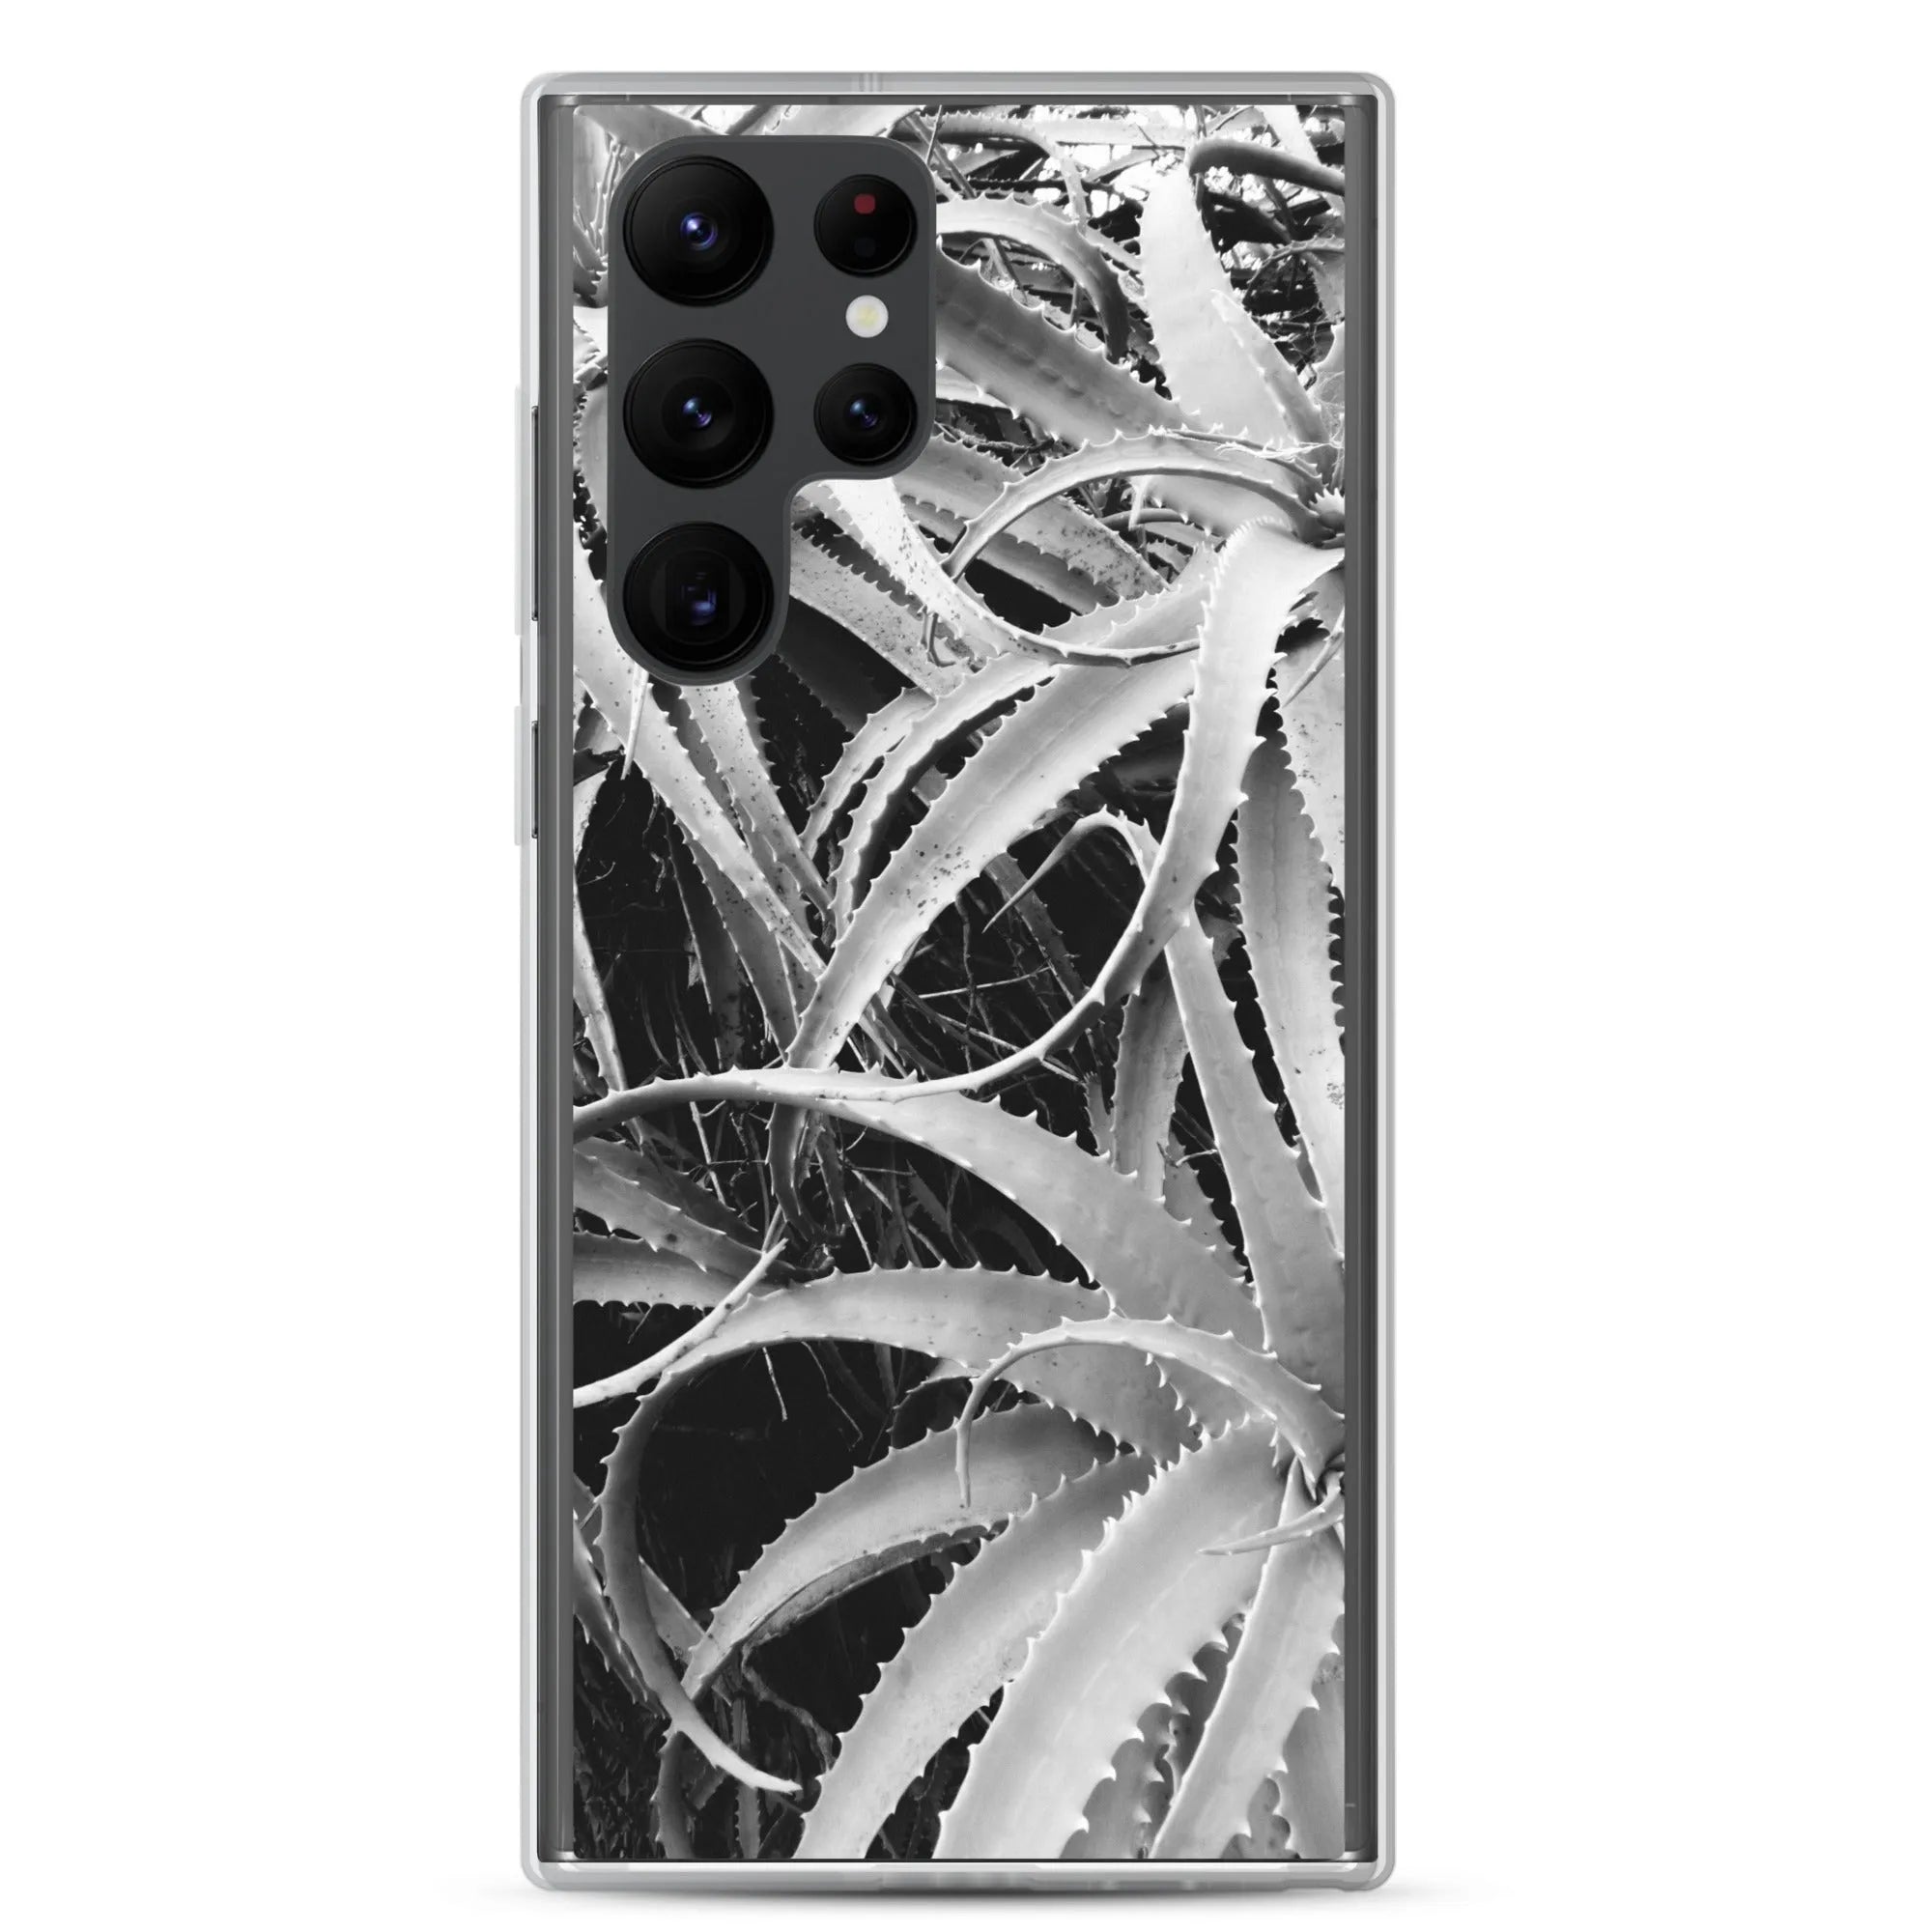 Spiked 2 + Too Samsung Galaxy Case - Black And White - Samsung Galaxy S22 Ultra - Mobile Phone Cases - Aesthetic Art